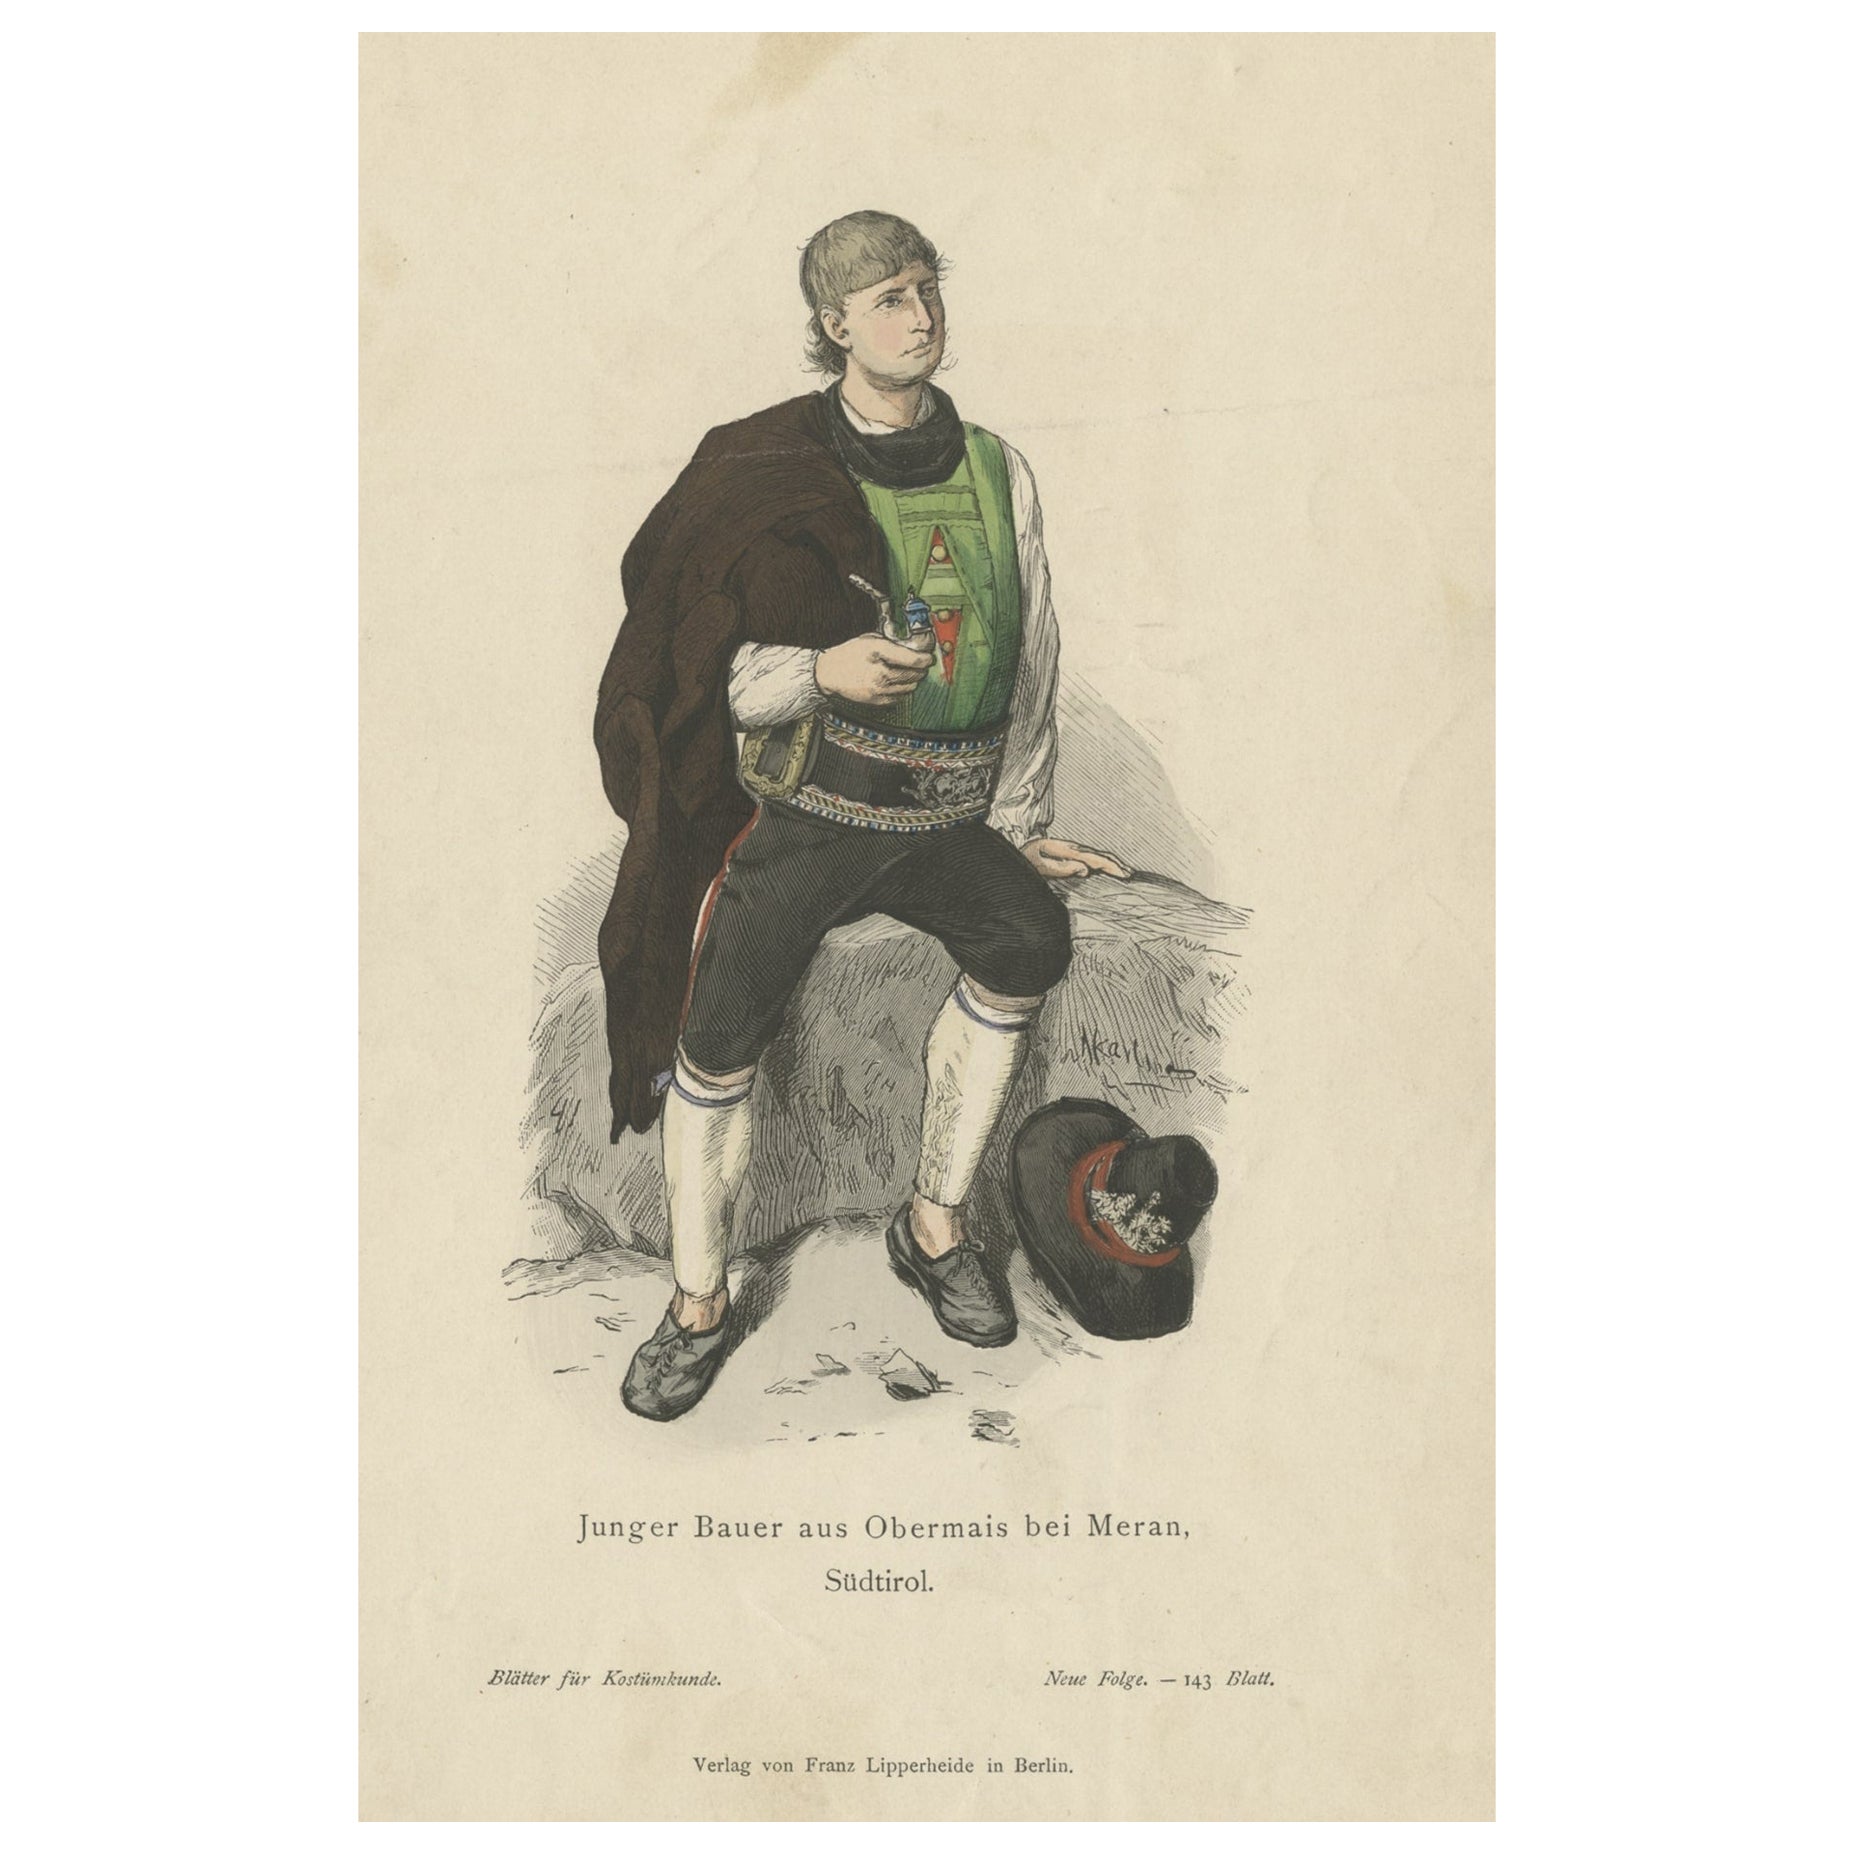 Antique Costume Print of a Young Farmer from the Region of Obermais, South Tyrol